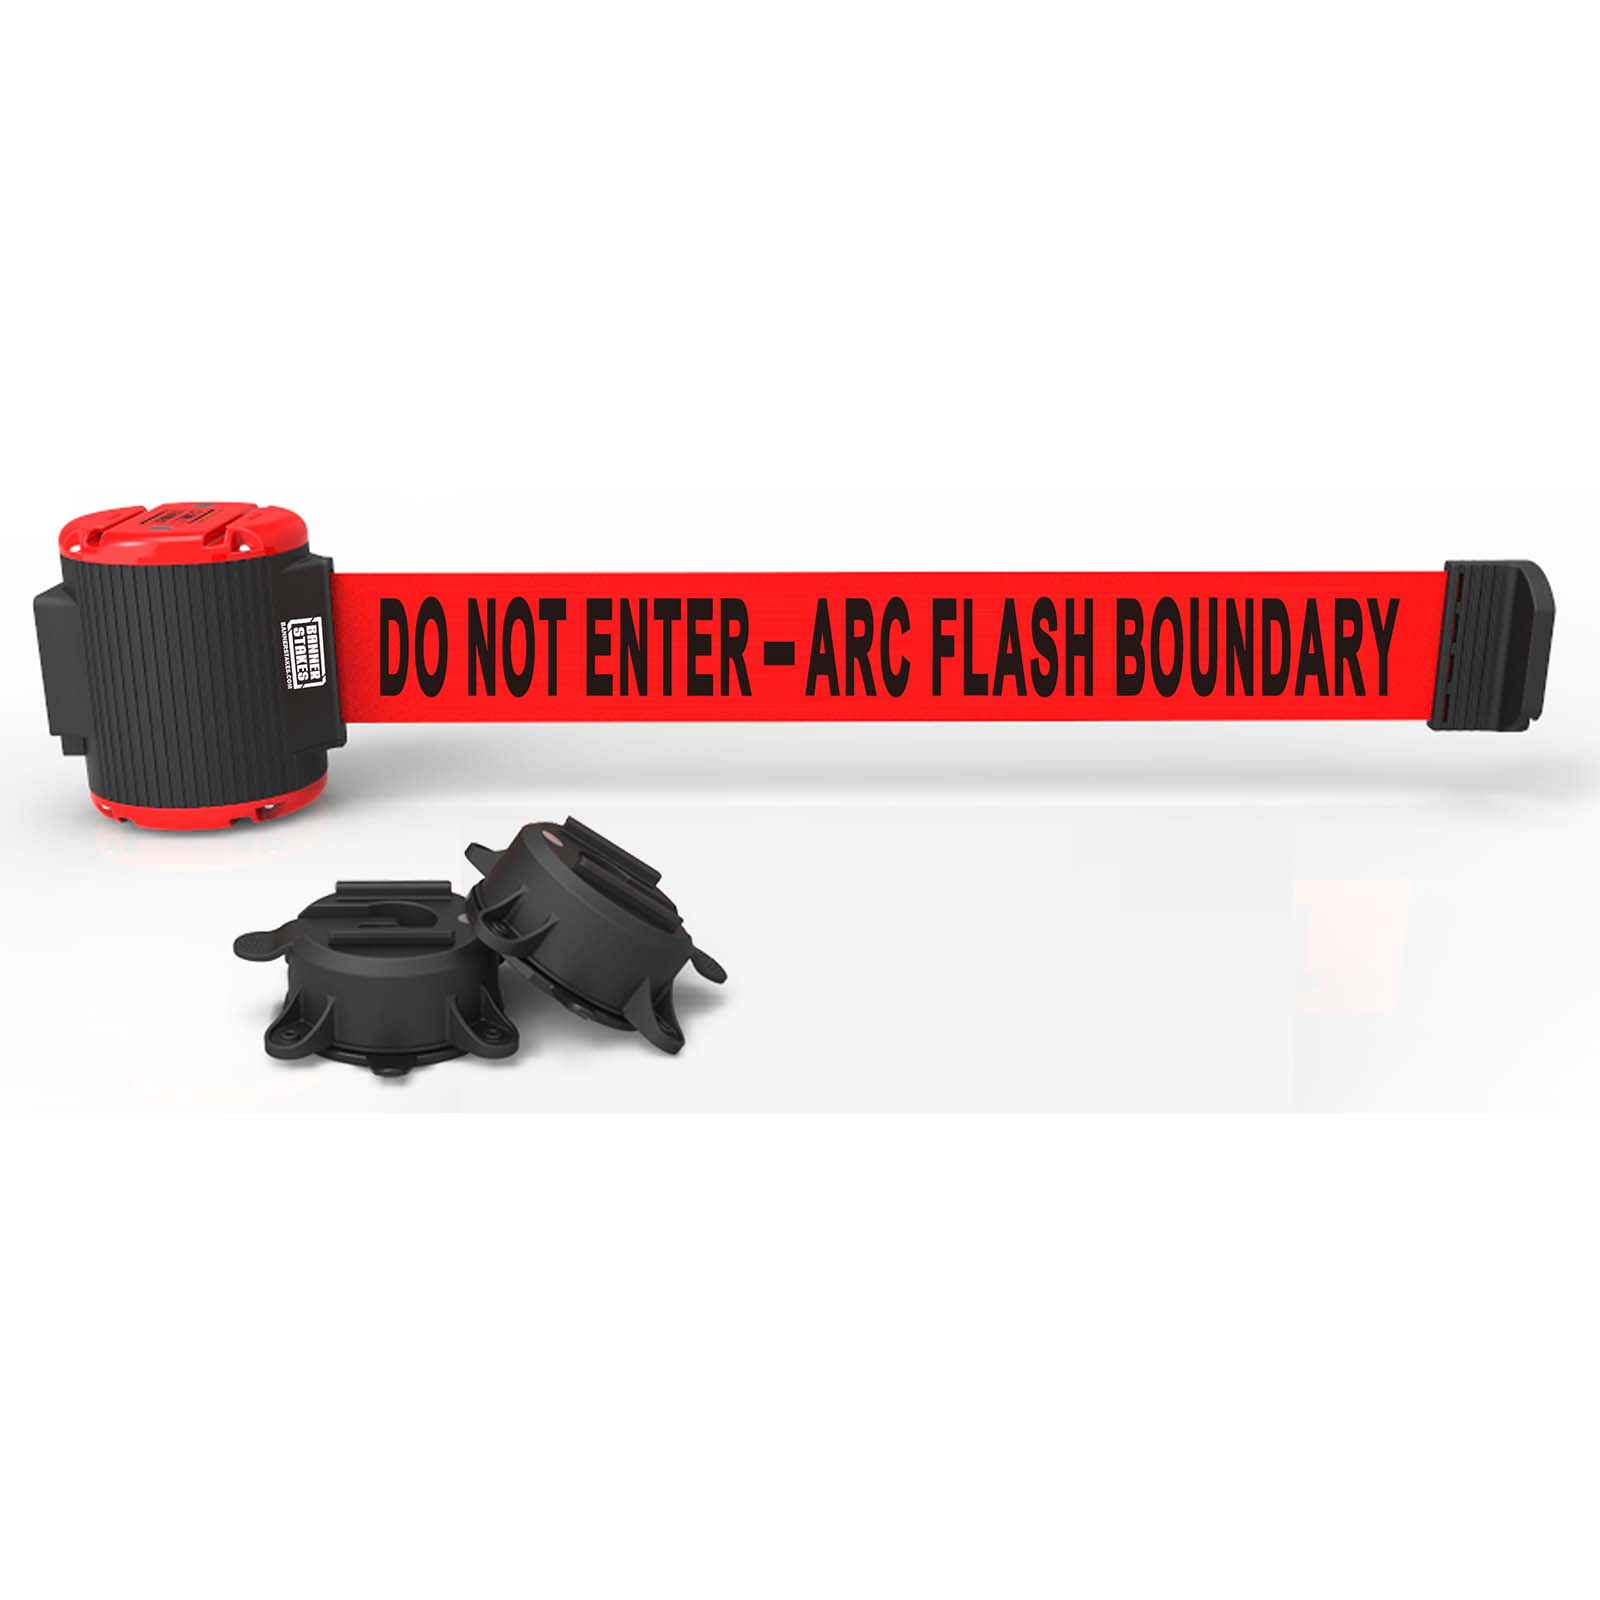 Banner Stakes MH5011 30' Magnetic Wall Mount Retractable - Red "Do Not Enter - Arc Flash Boundary" Banner